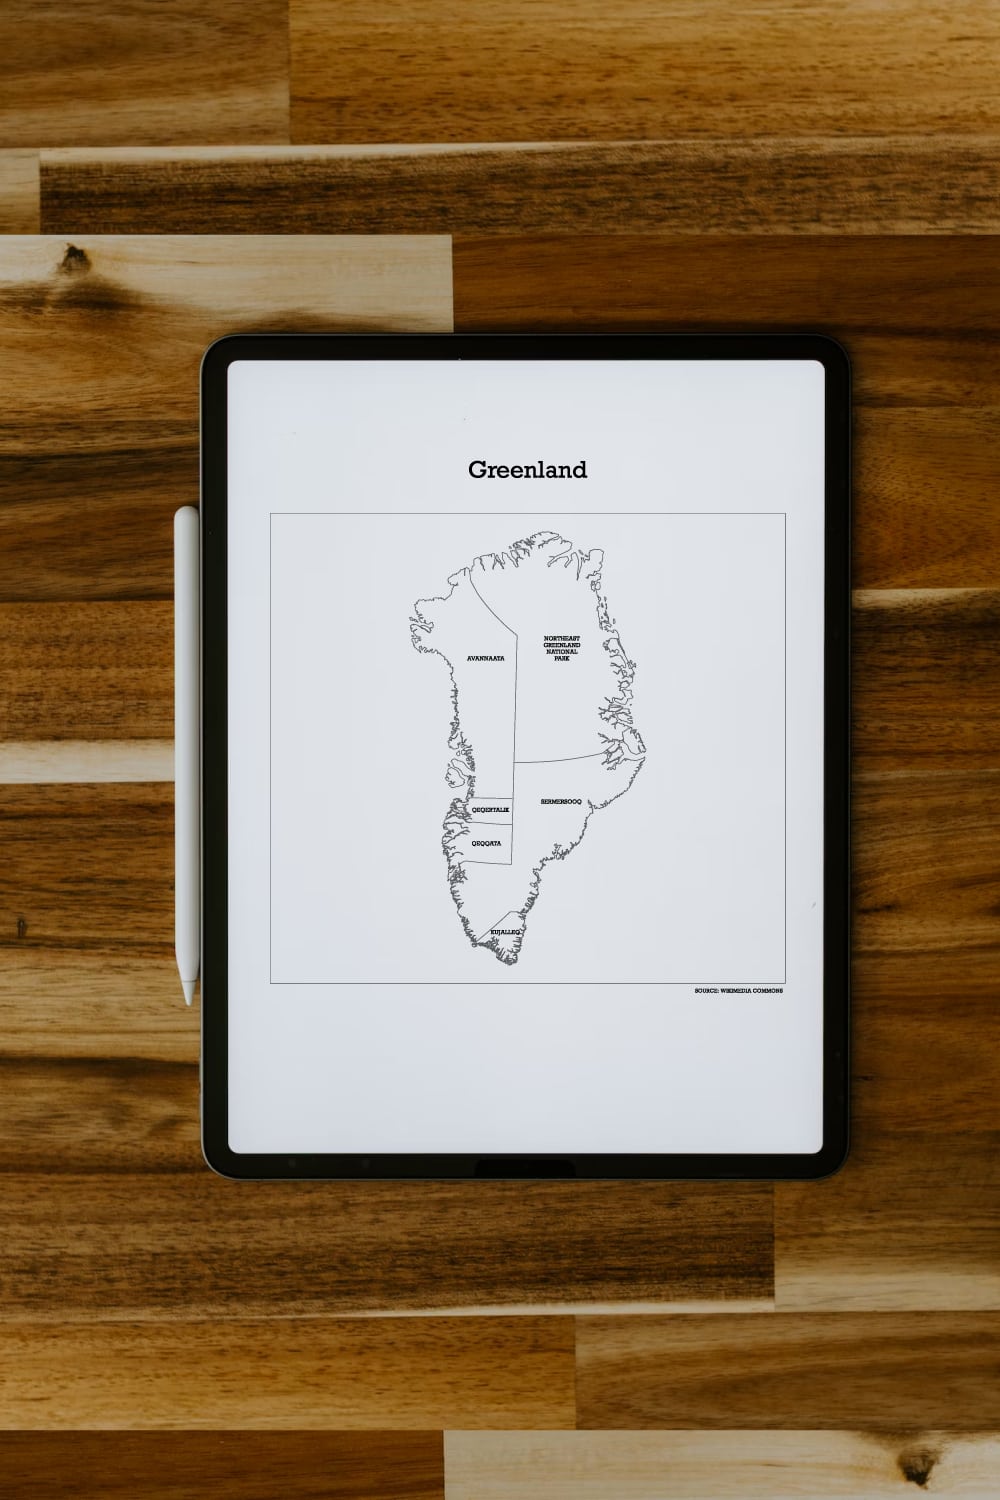 Preview of printable map of Greenland file on ipad screen on wooden desk.